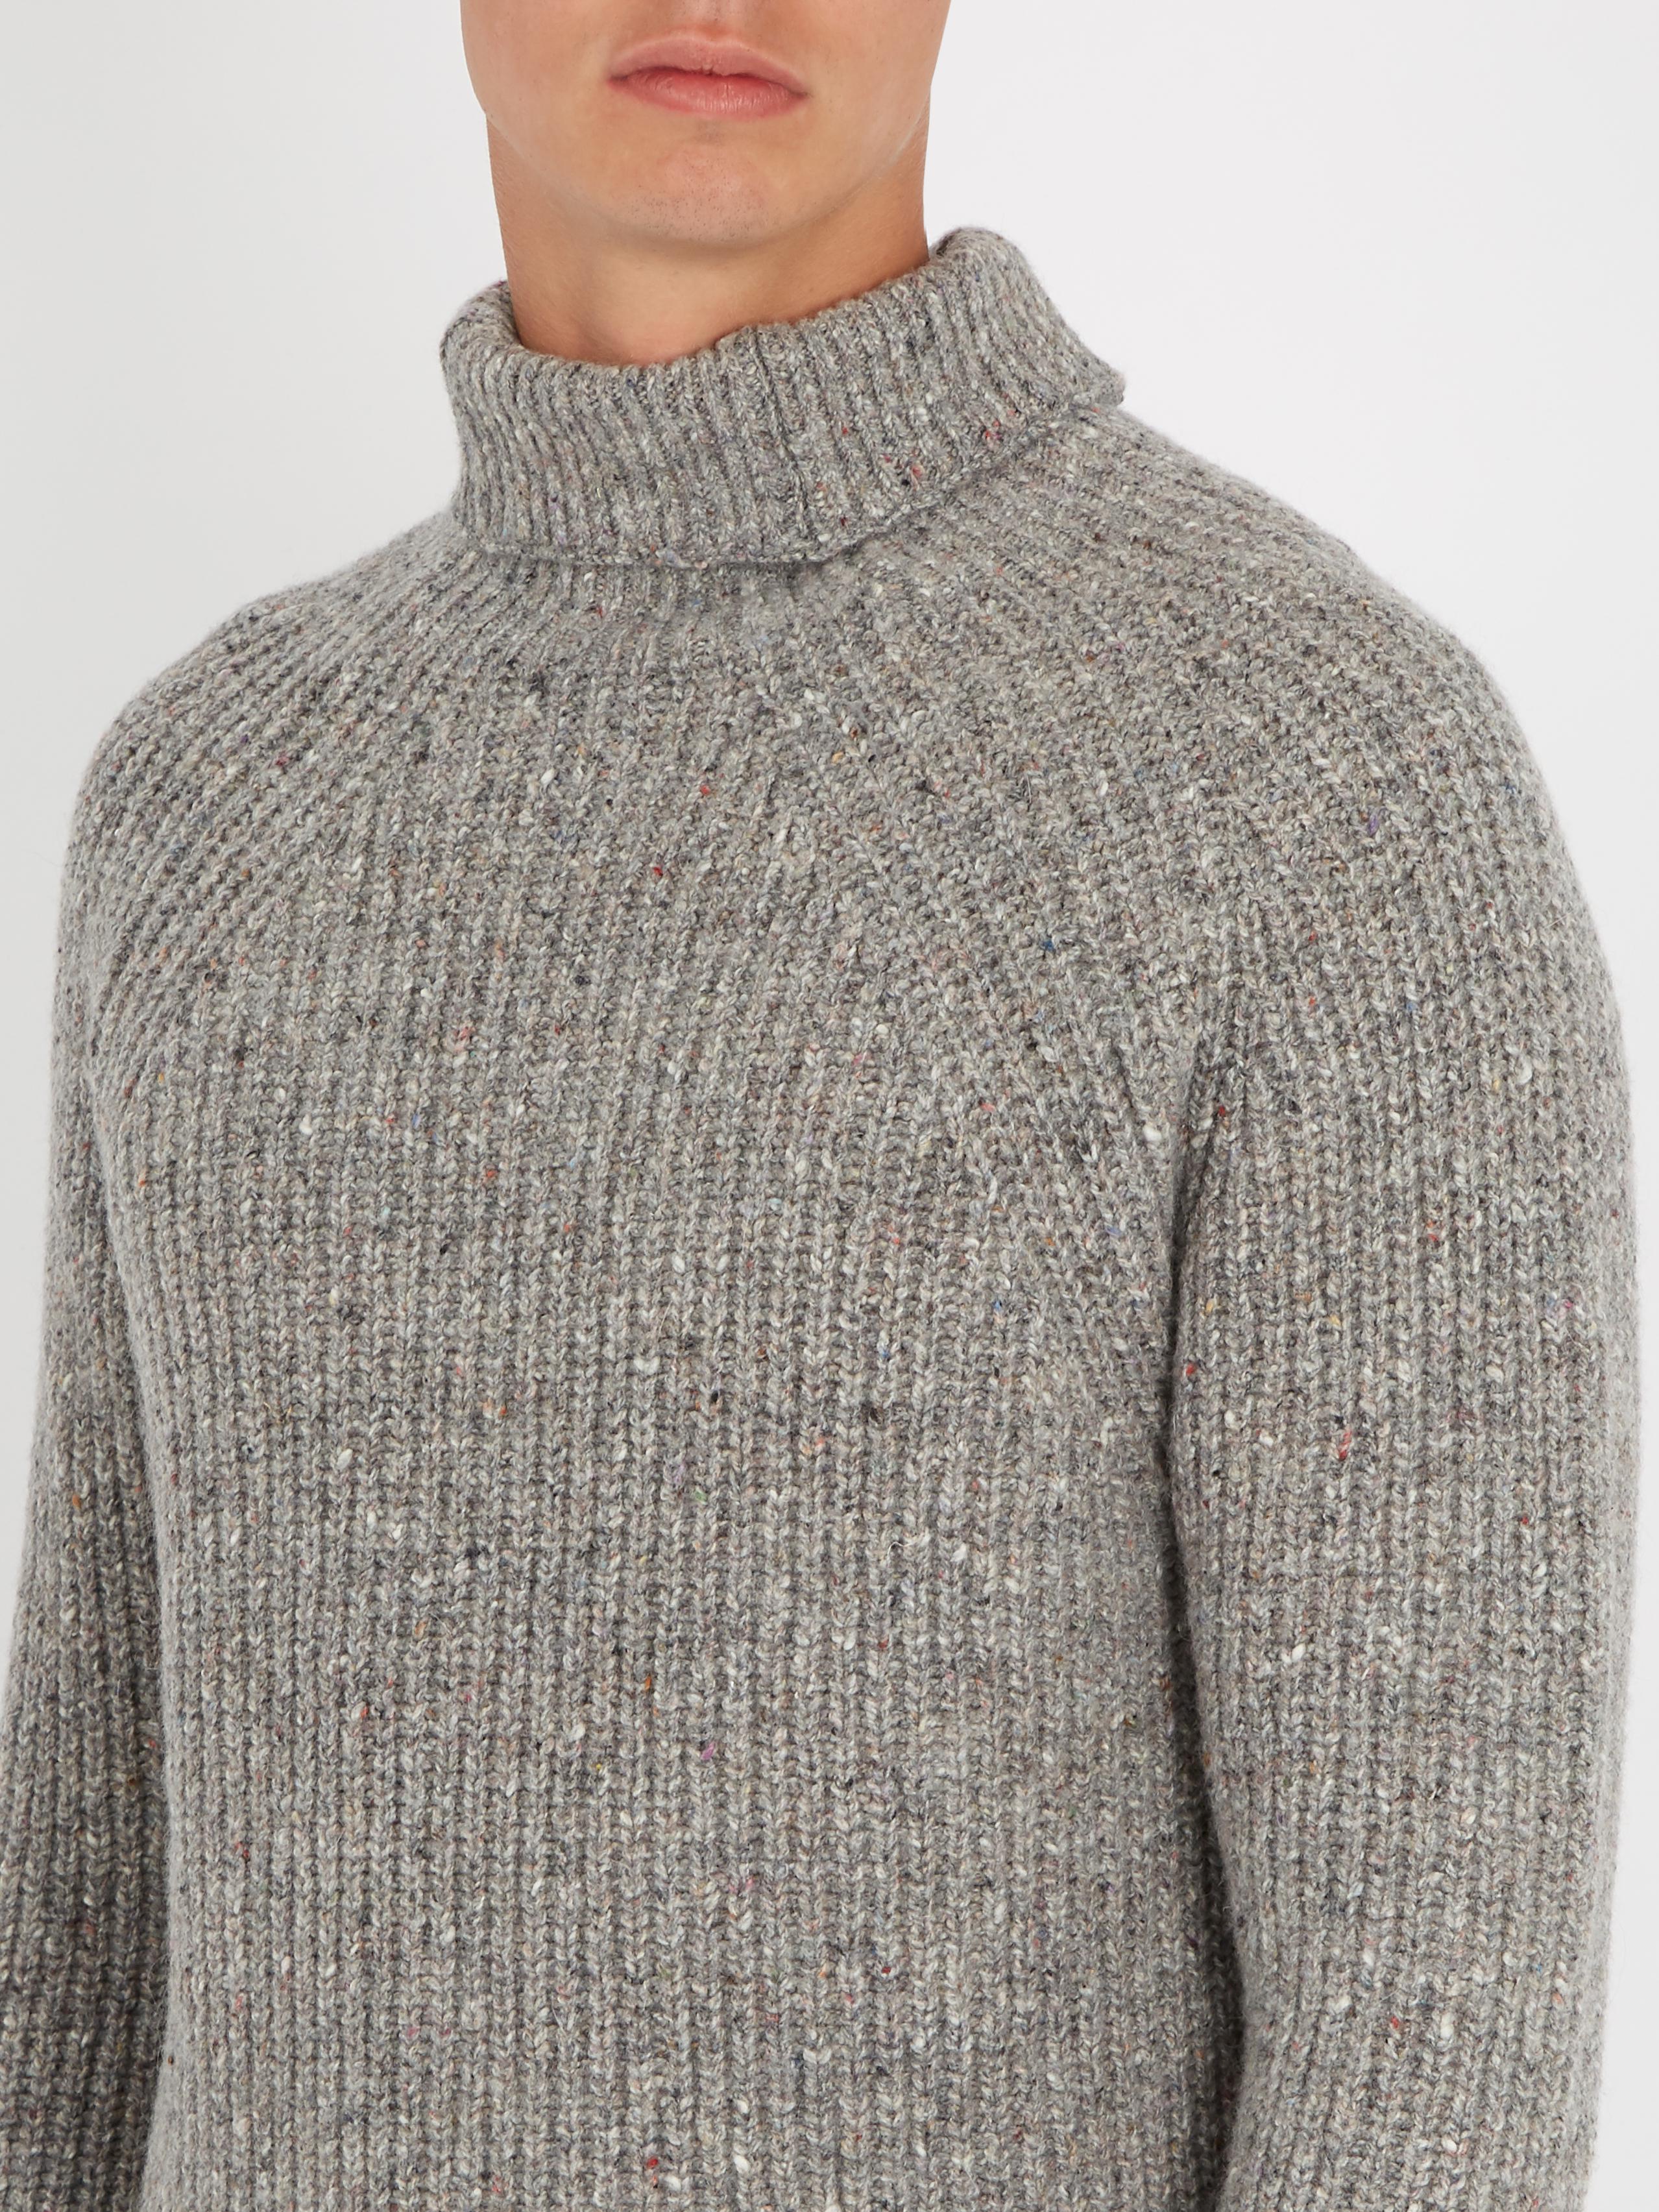 inis-meain-GREY-MULTI-Boatbuilder-Wool-A